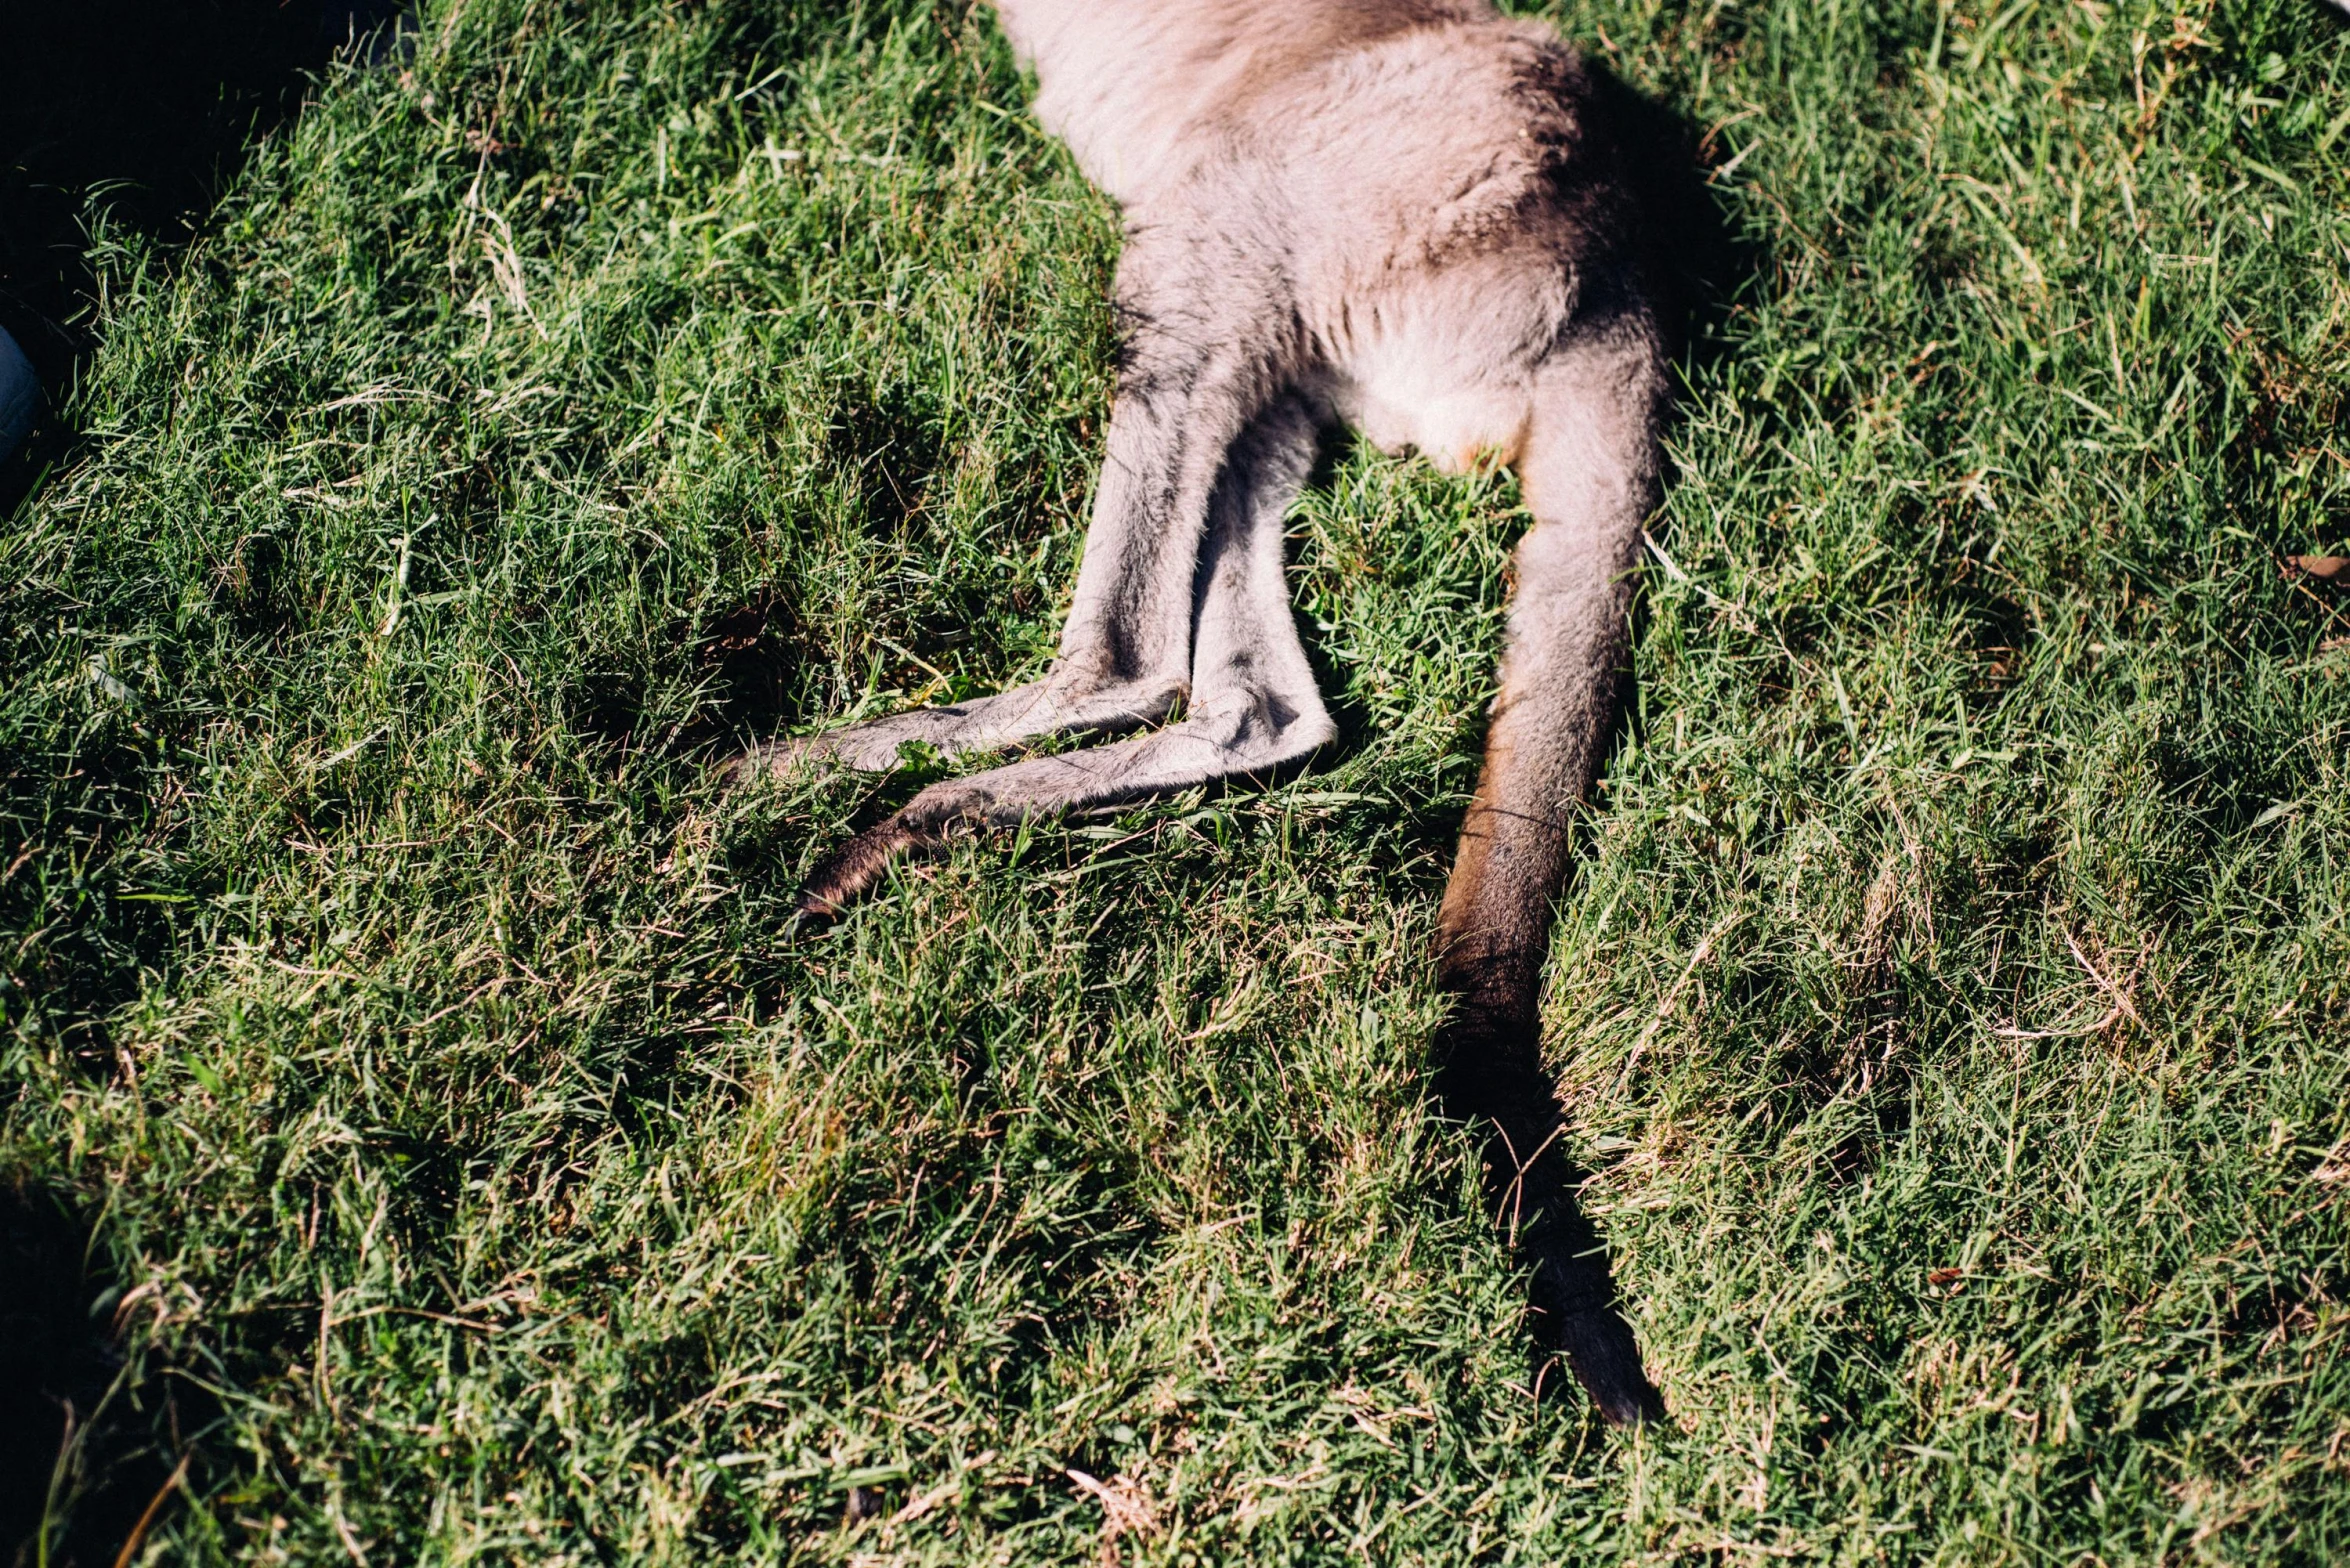 a kangaroo standing on top of a lush green field, by Ren Hang, hurufiyya, morning light showing injuries, monkey limbs, laying on the ground, in the australian outback